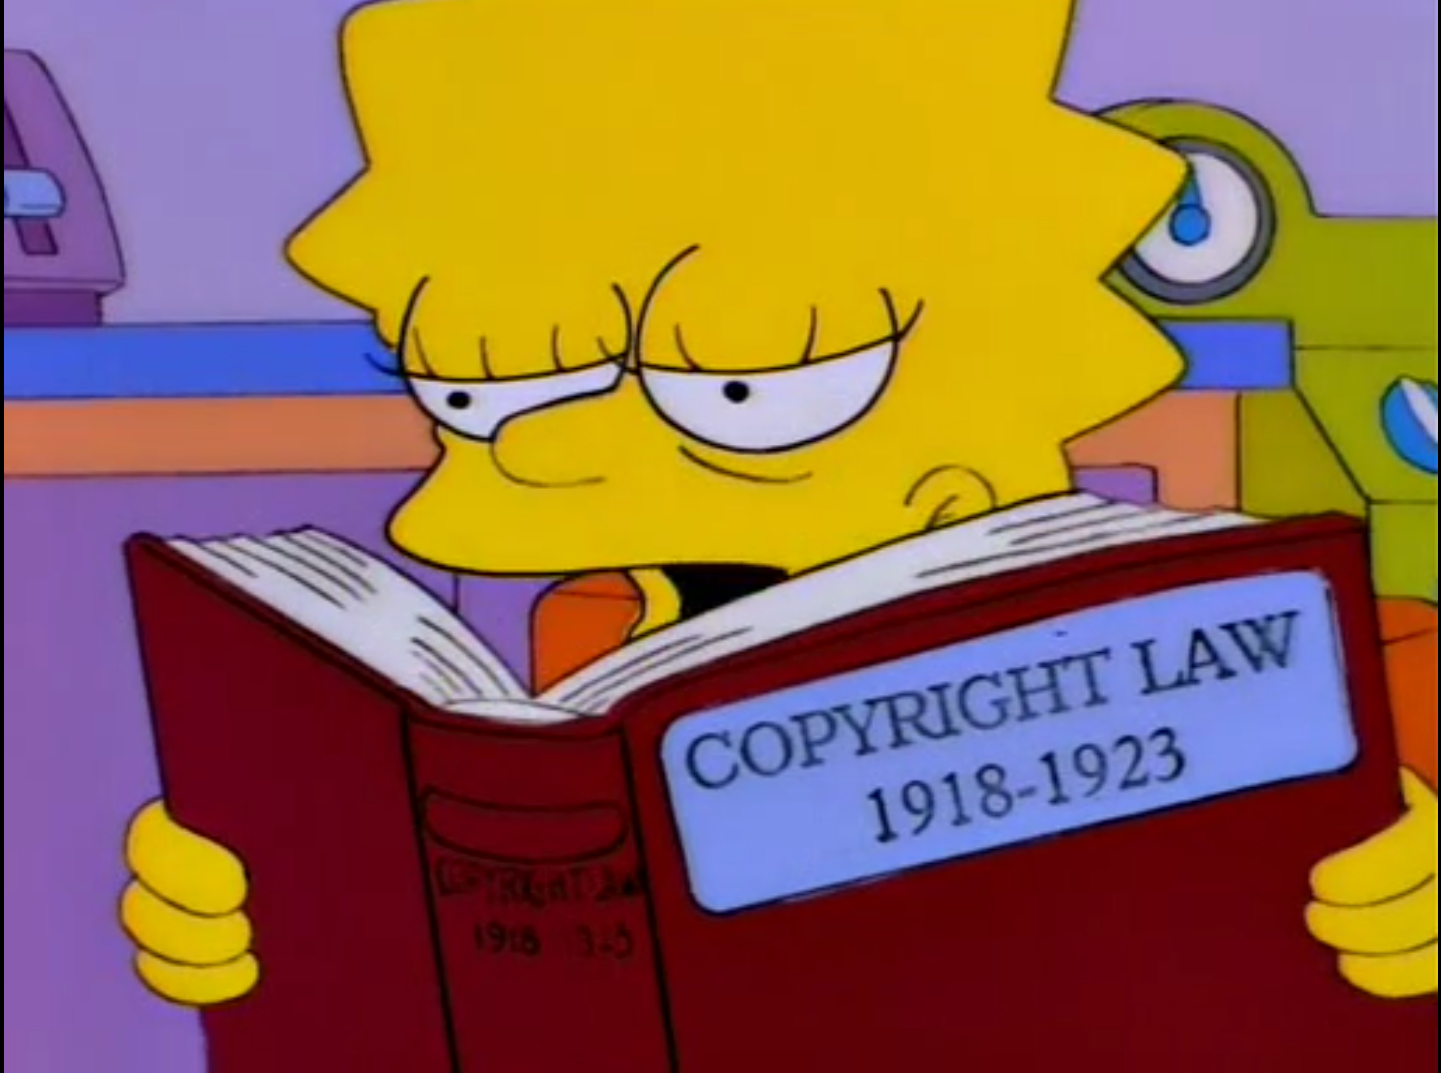 lisa and copyright